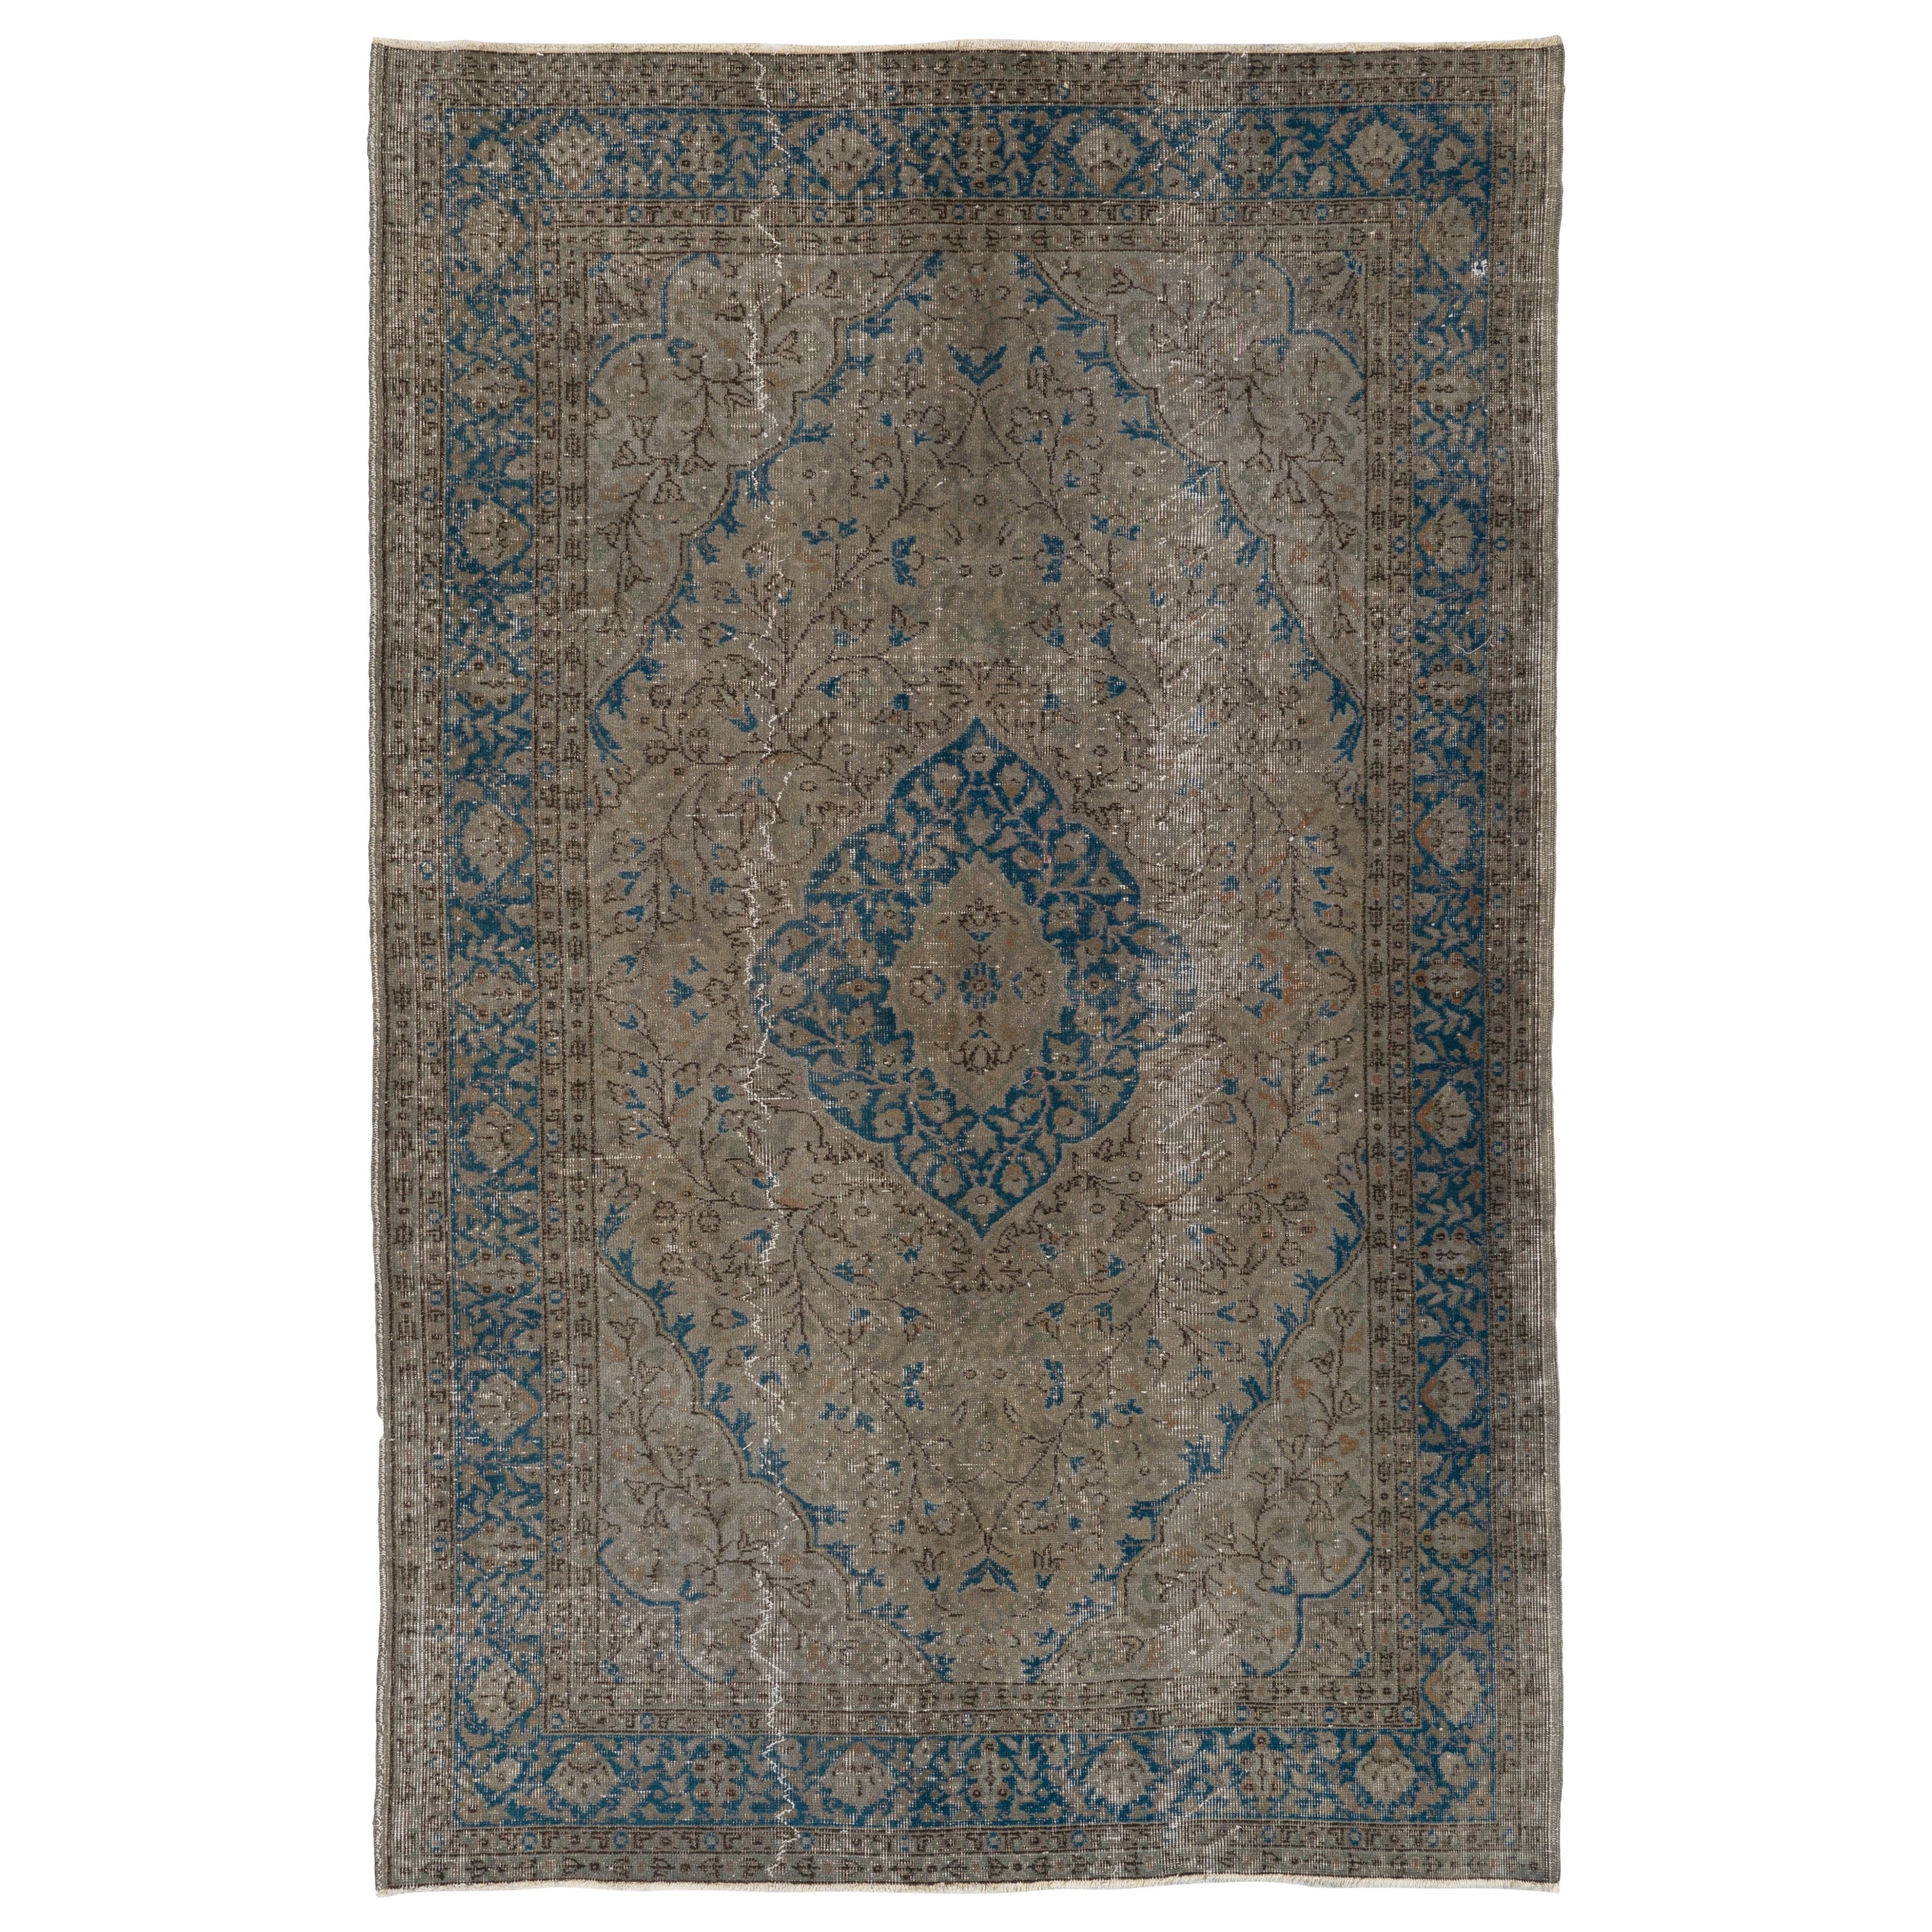 6x9 Ft One-of-a-Kind Vintage Handmade Turkish Wool Area Rug in Brown and Blue